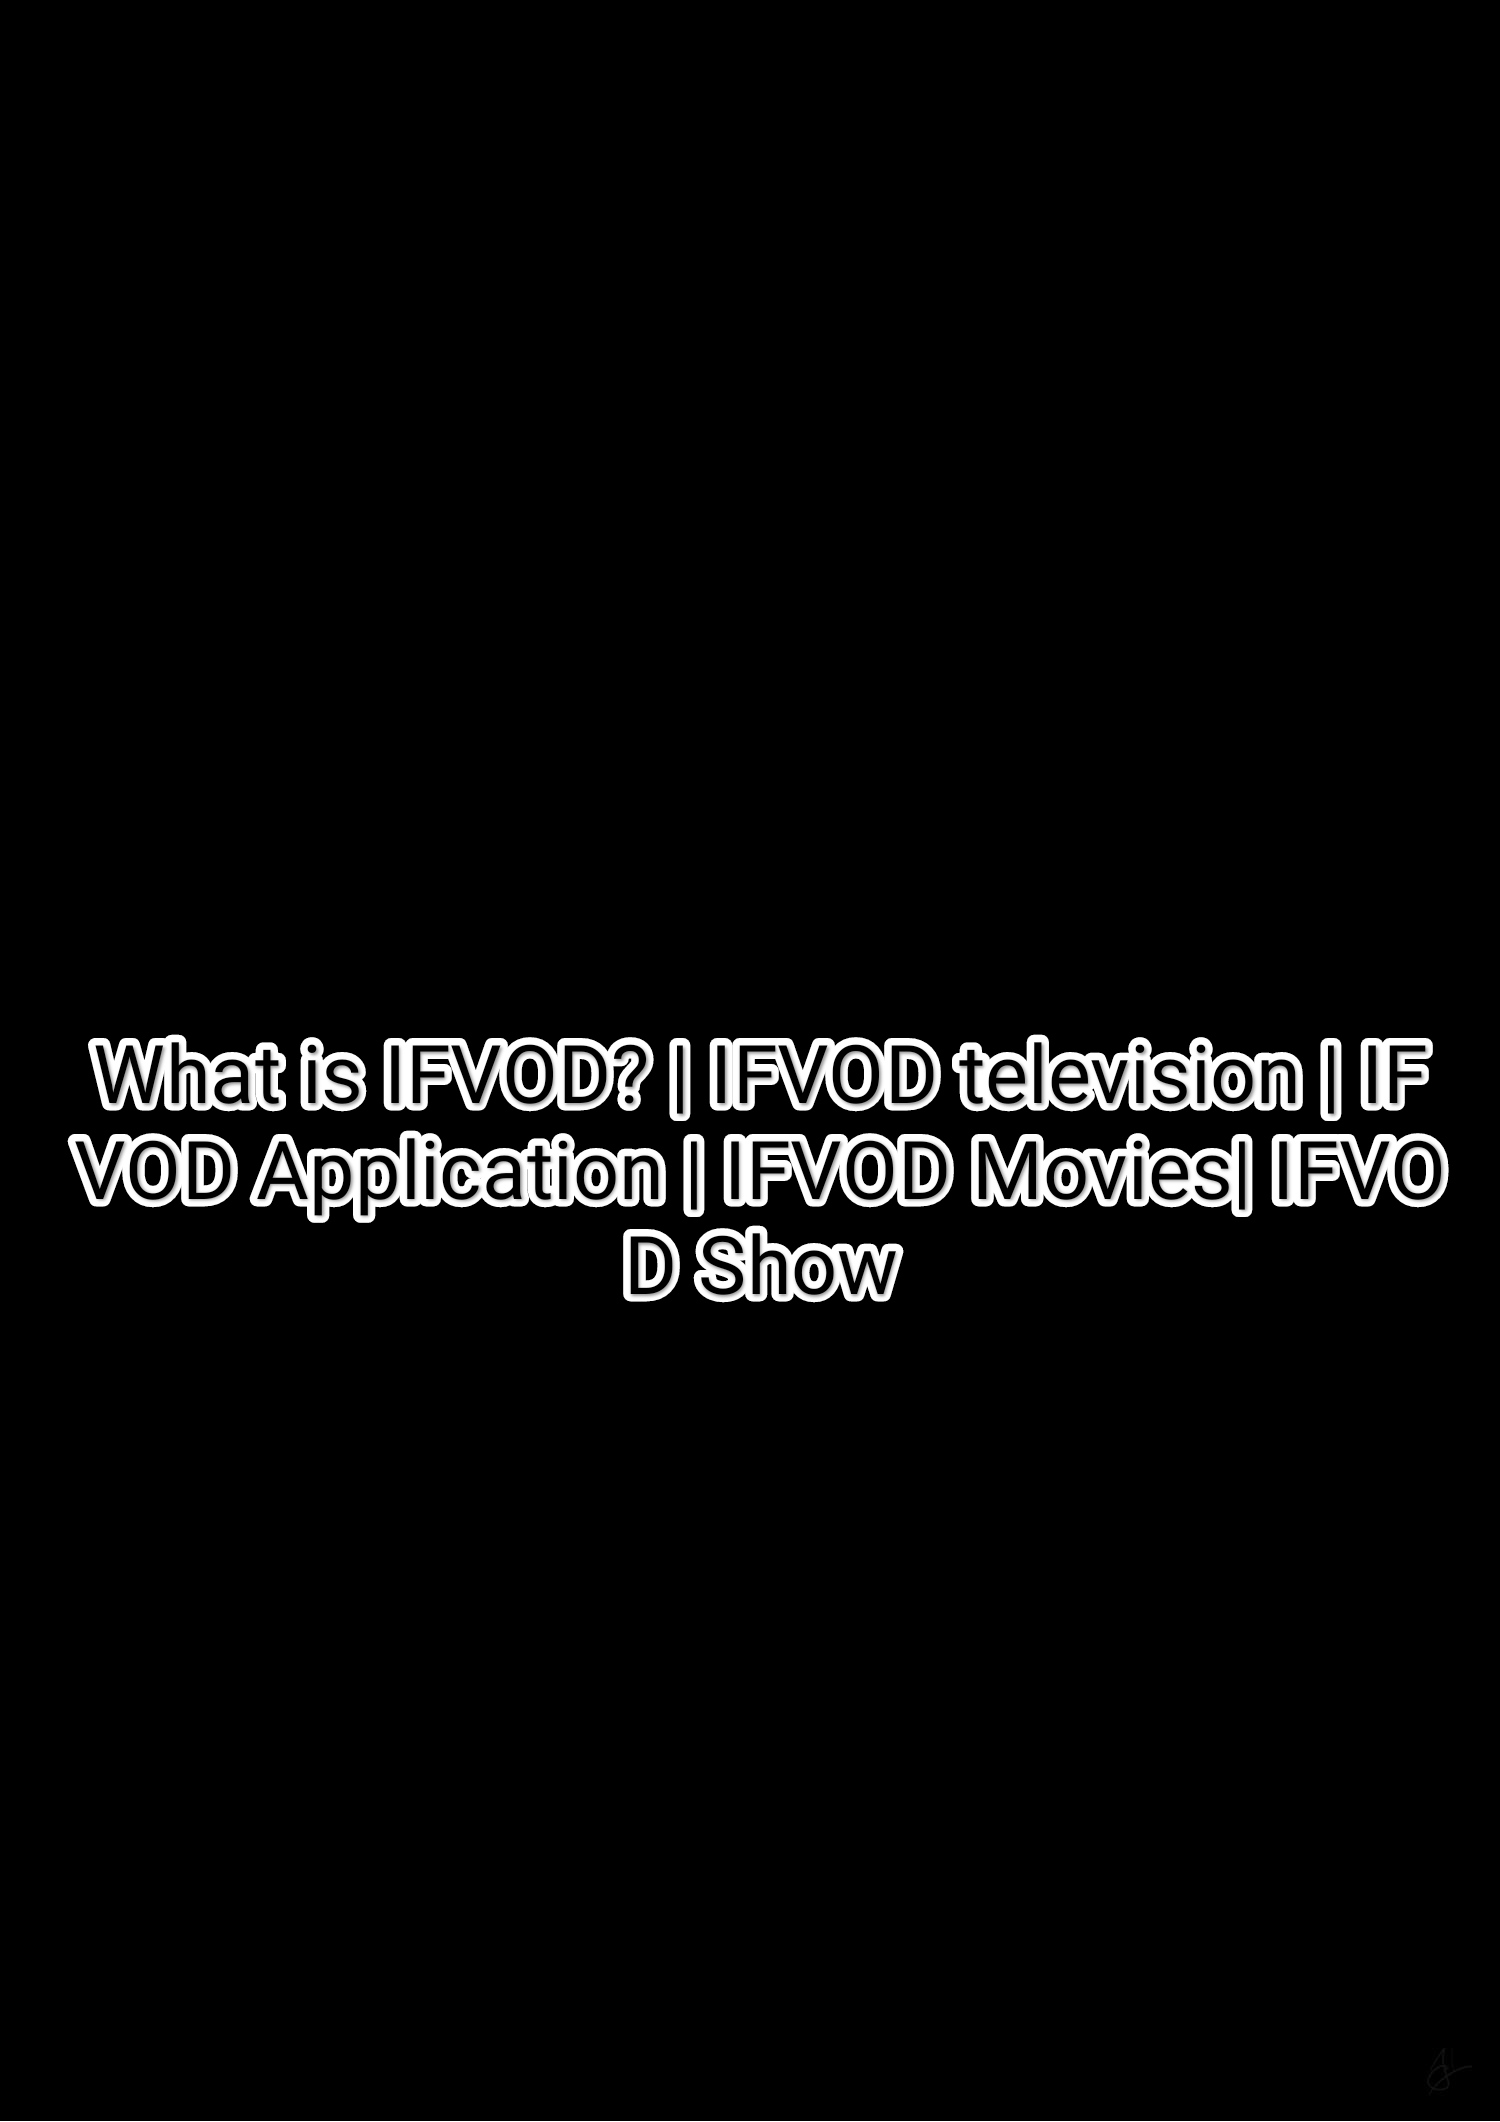 What is IFVOD? | IFVOD television | IFVOD Application | IFVOD Movies| IFVOD Show